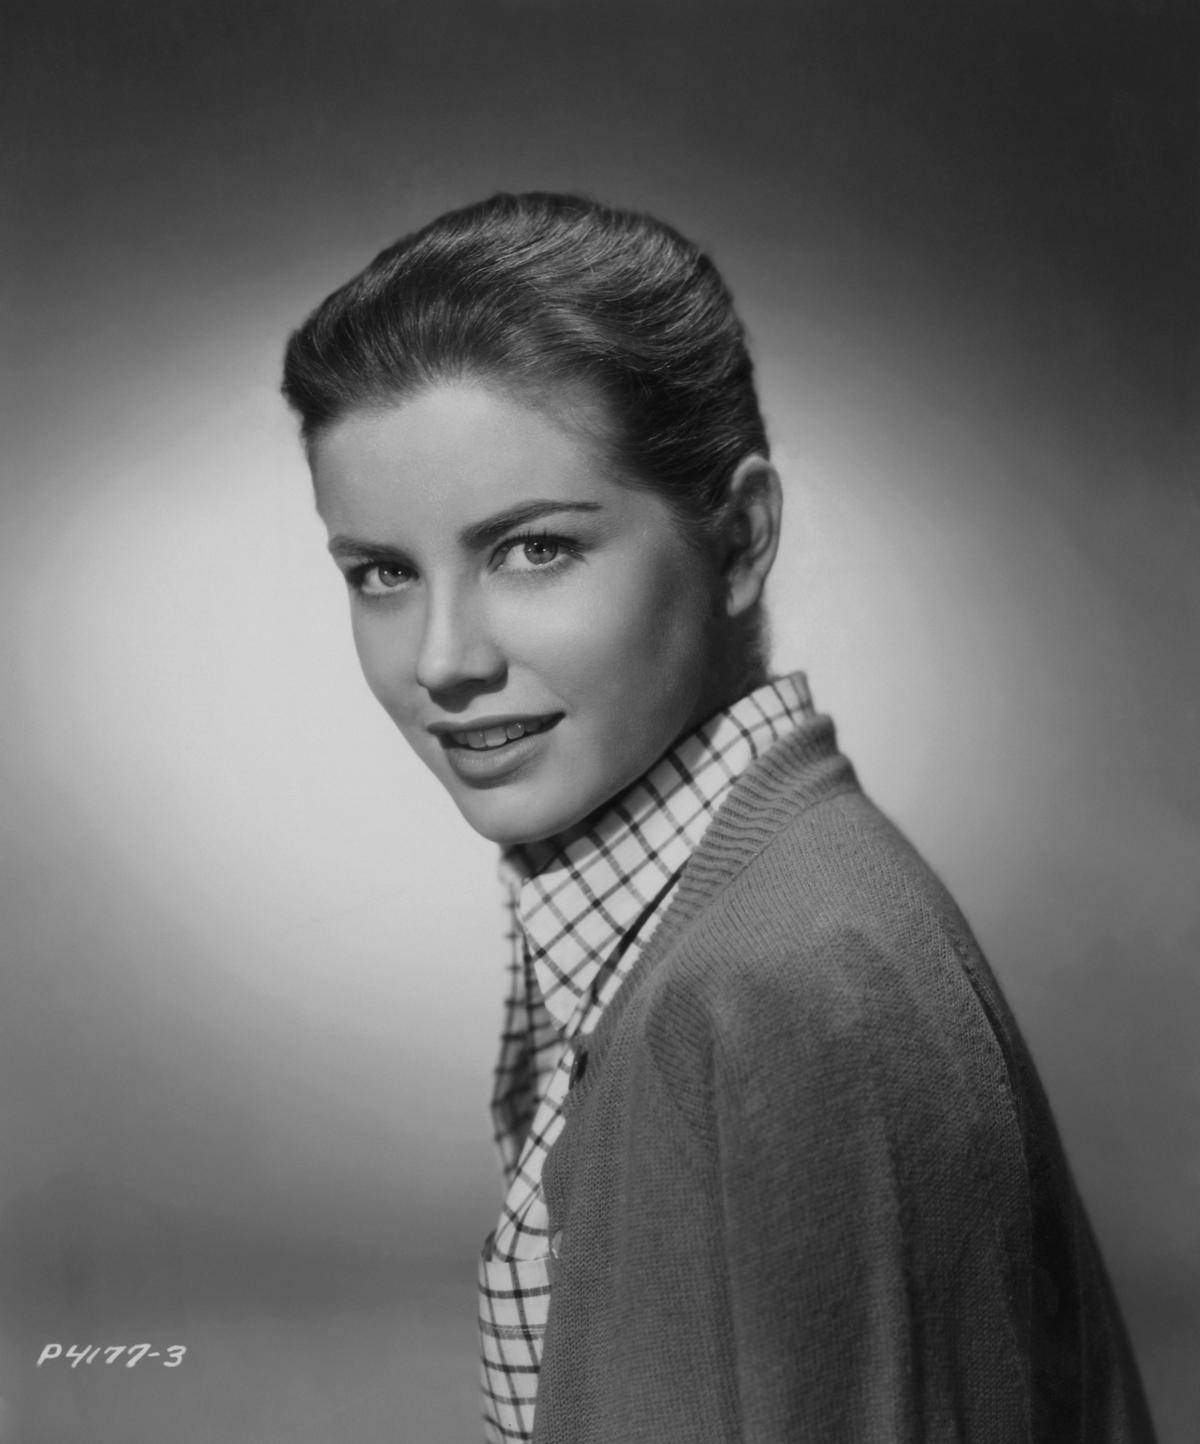 Actress Dolores Hart was expected to be the next Grace Kelly. She left Hollywood and took an altogether different path. (Pictorial Parade/Archive Photos/Getty Images)